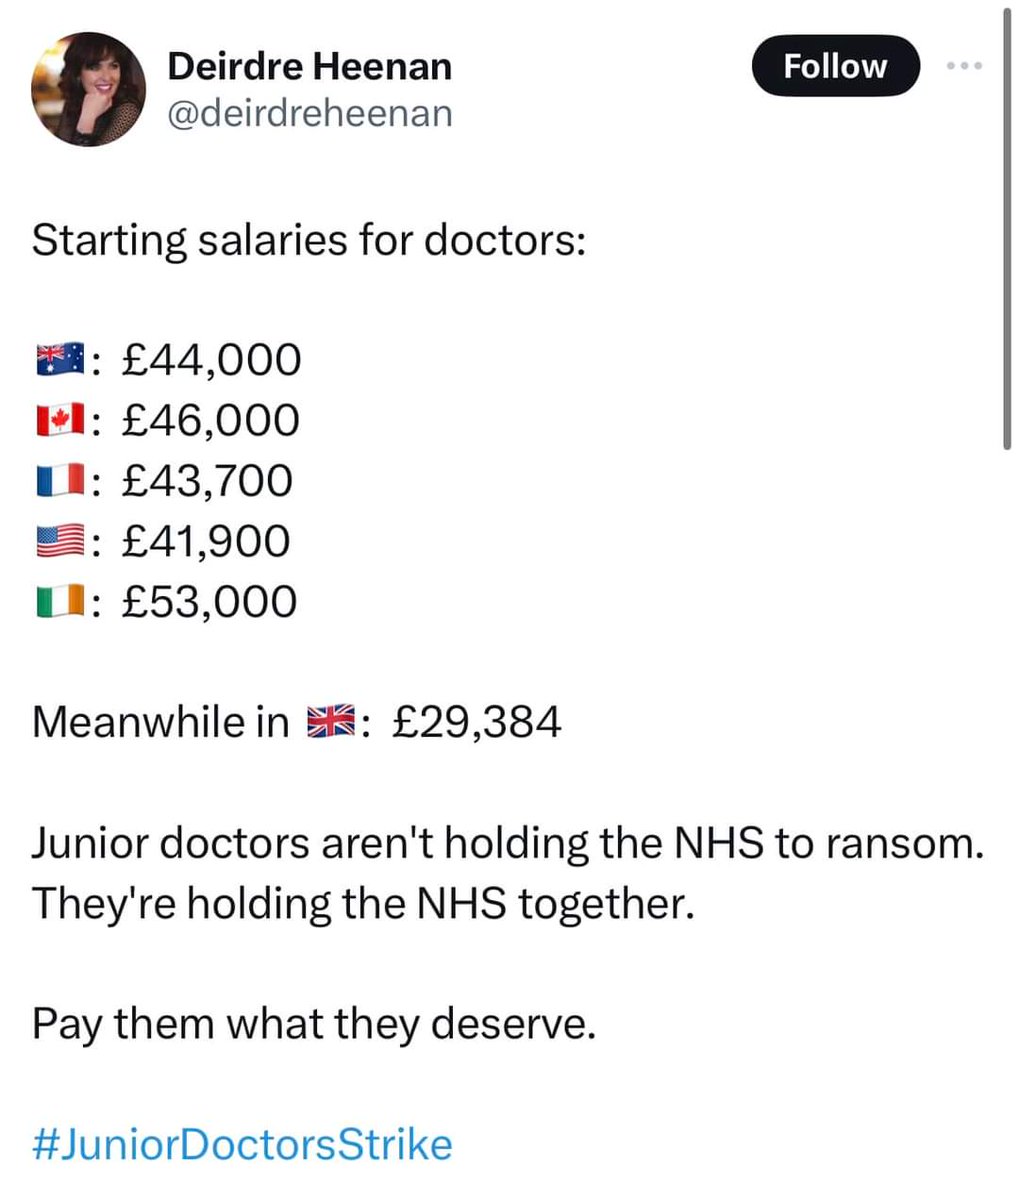 This corrupt Tory government have spent 13 years destroying the NHS.
Junior doctors are damn right saying enough is enough.
#GeneralElection2024 
#ToryCriminalsUnfitToGovern 
#JuniorDoctorsStrike